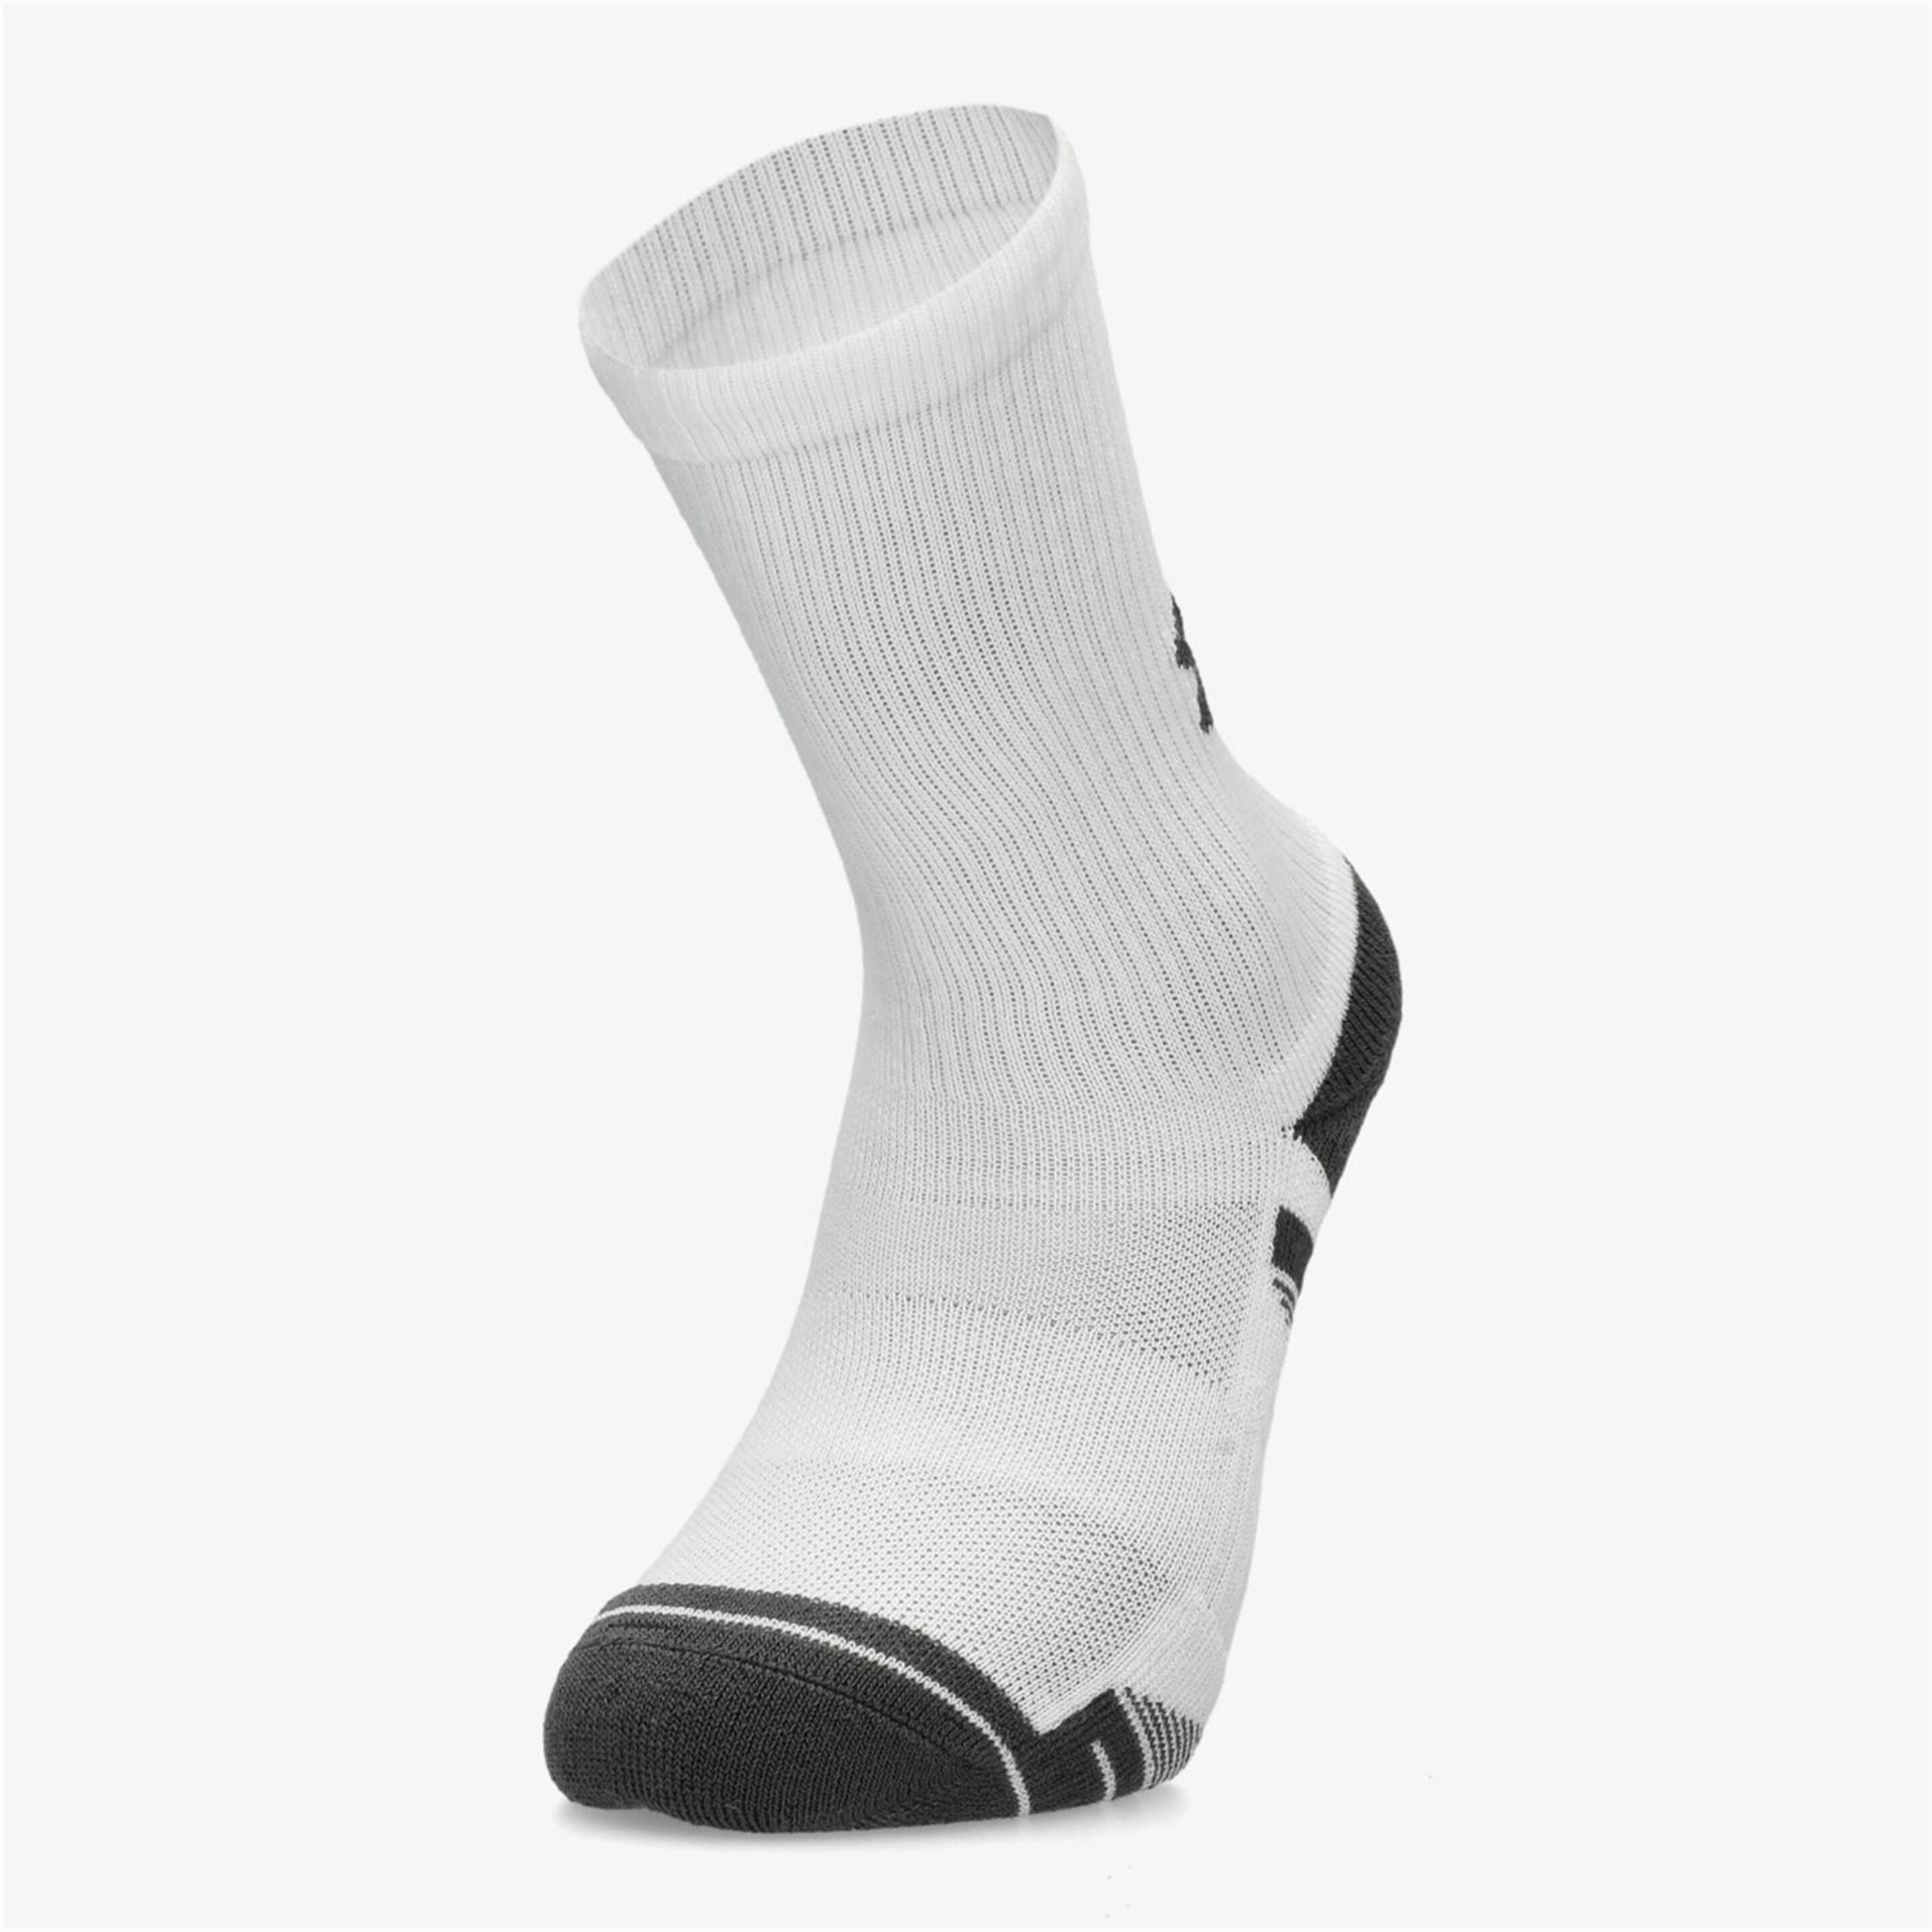 Under Armour Performance Tech - blanco - Calcetines